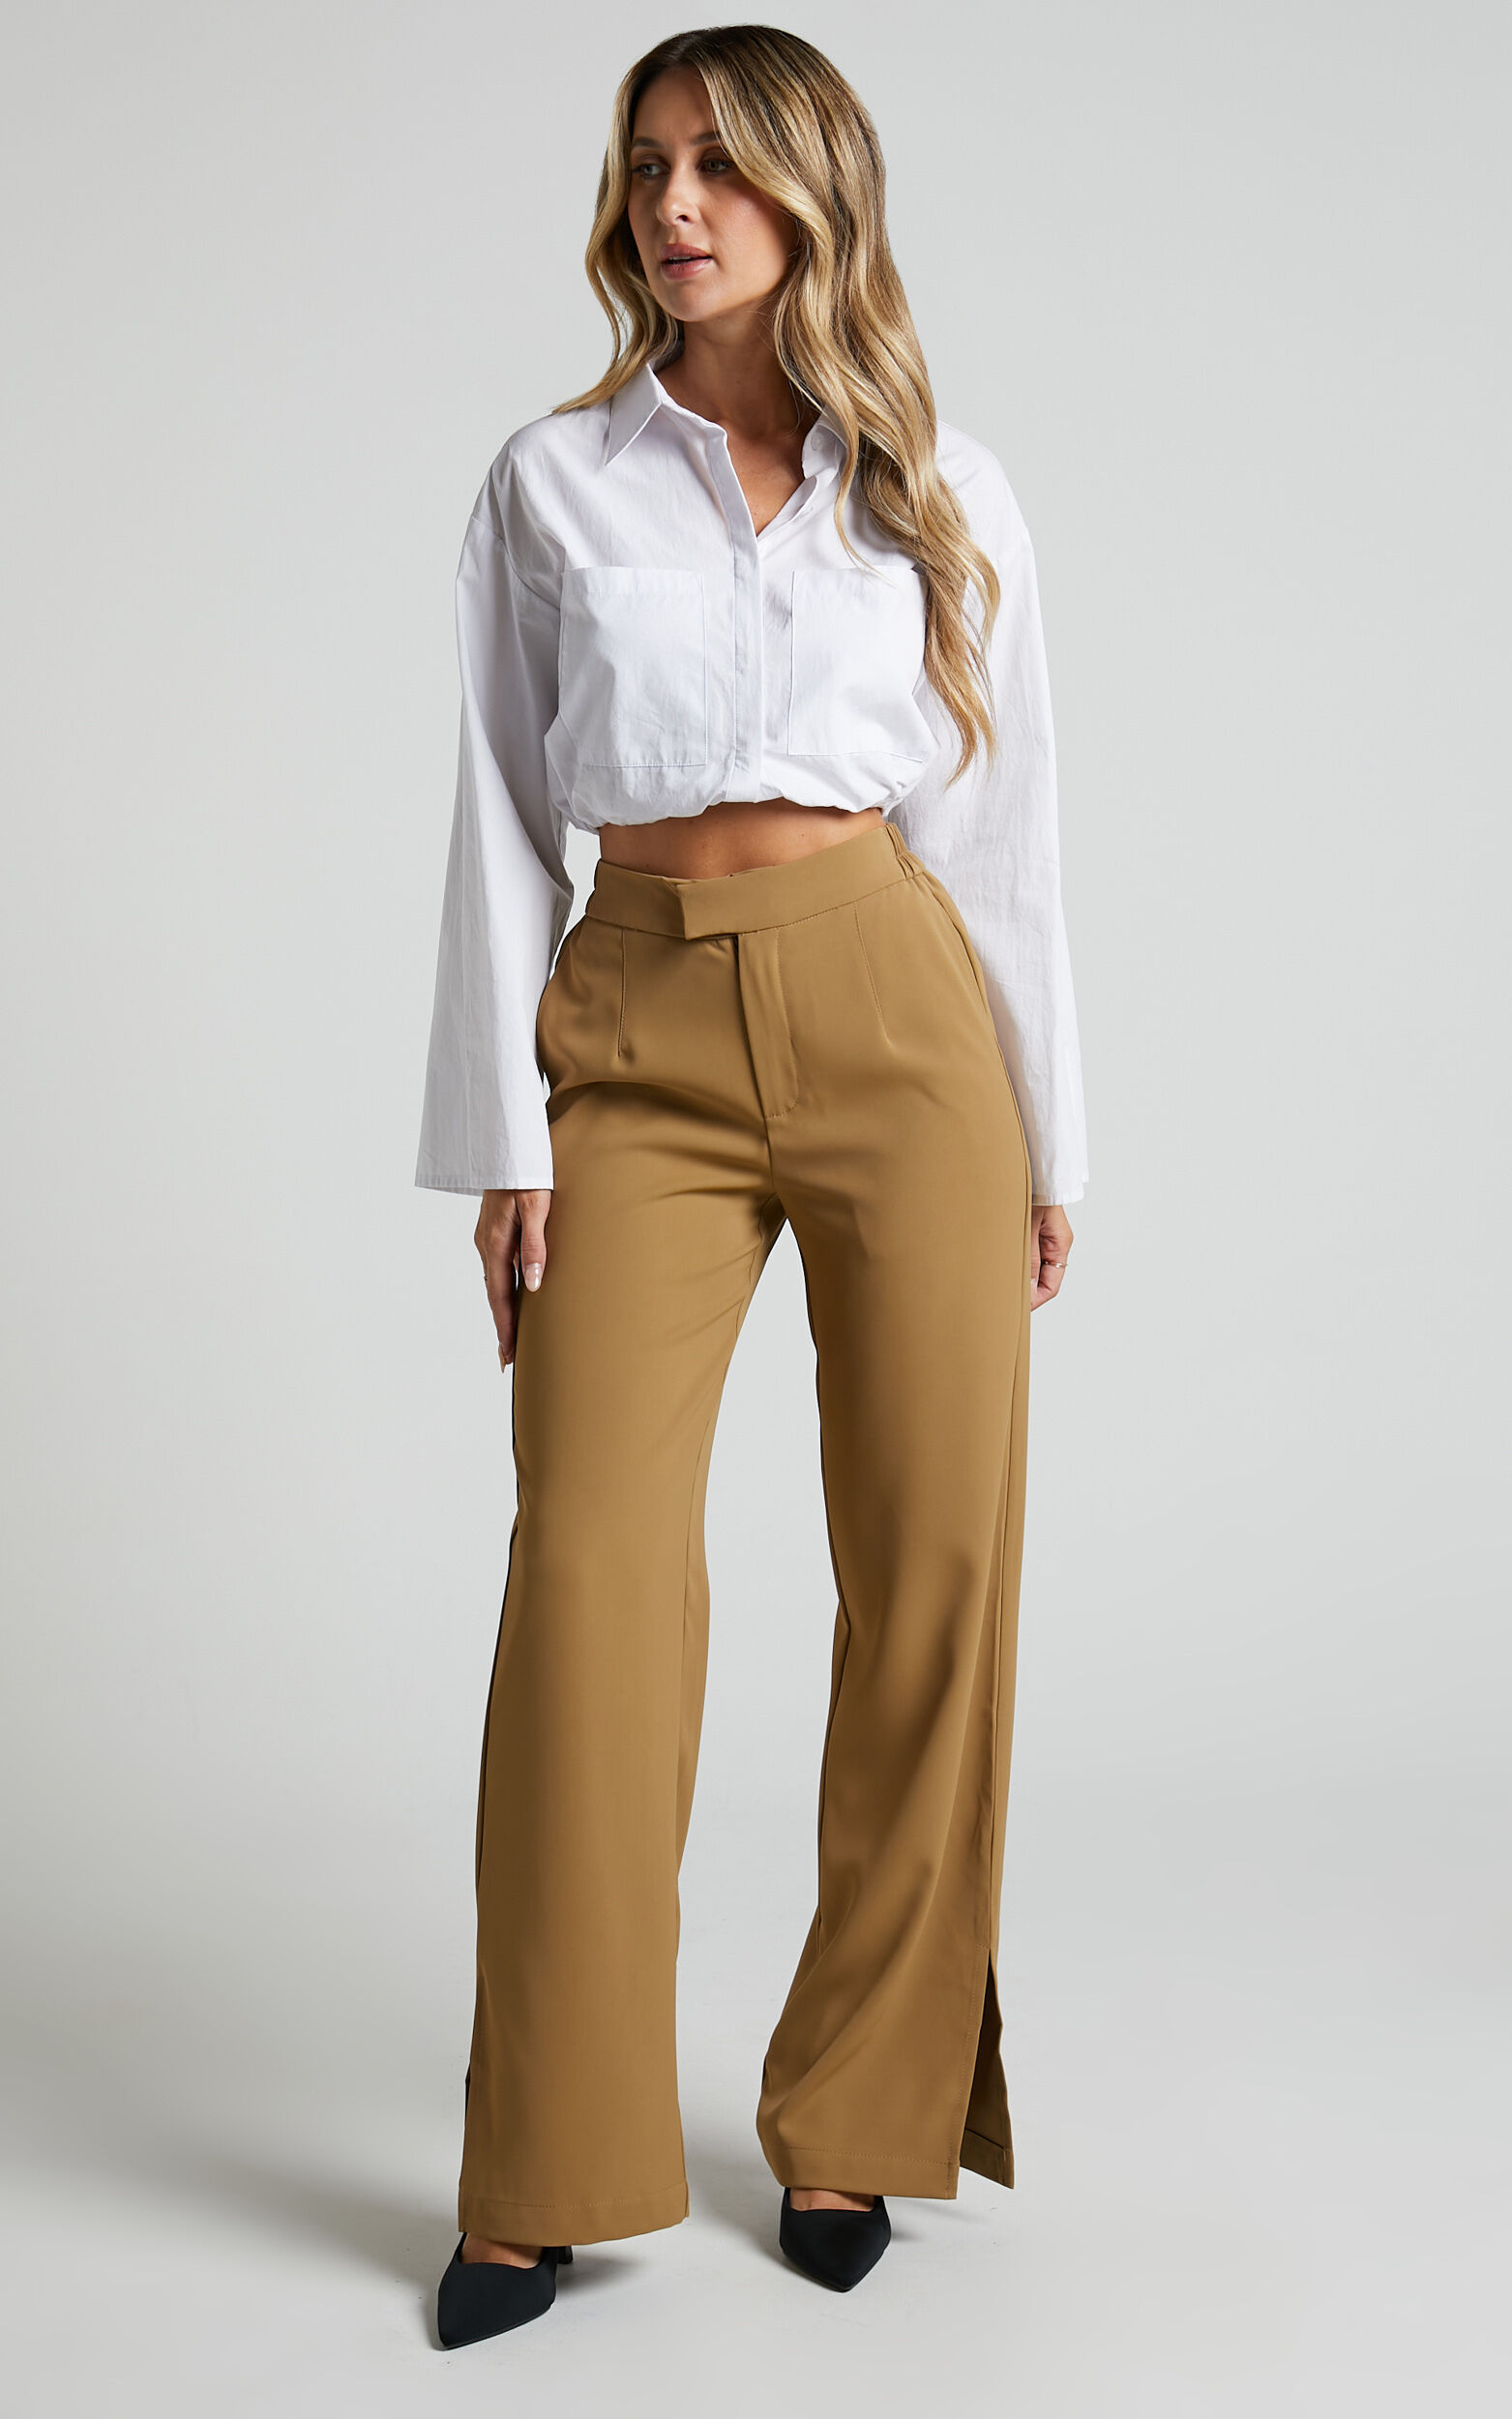 Mhina Trousers - High Waisted Split Hem Tailored Trousers in Toffee - 04, BRN1, super-hi-res image number null